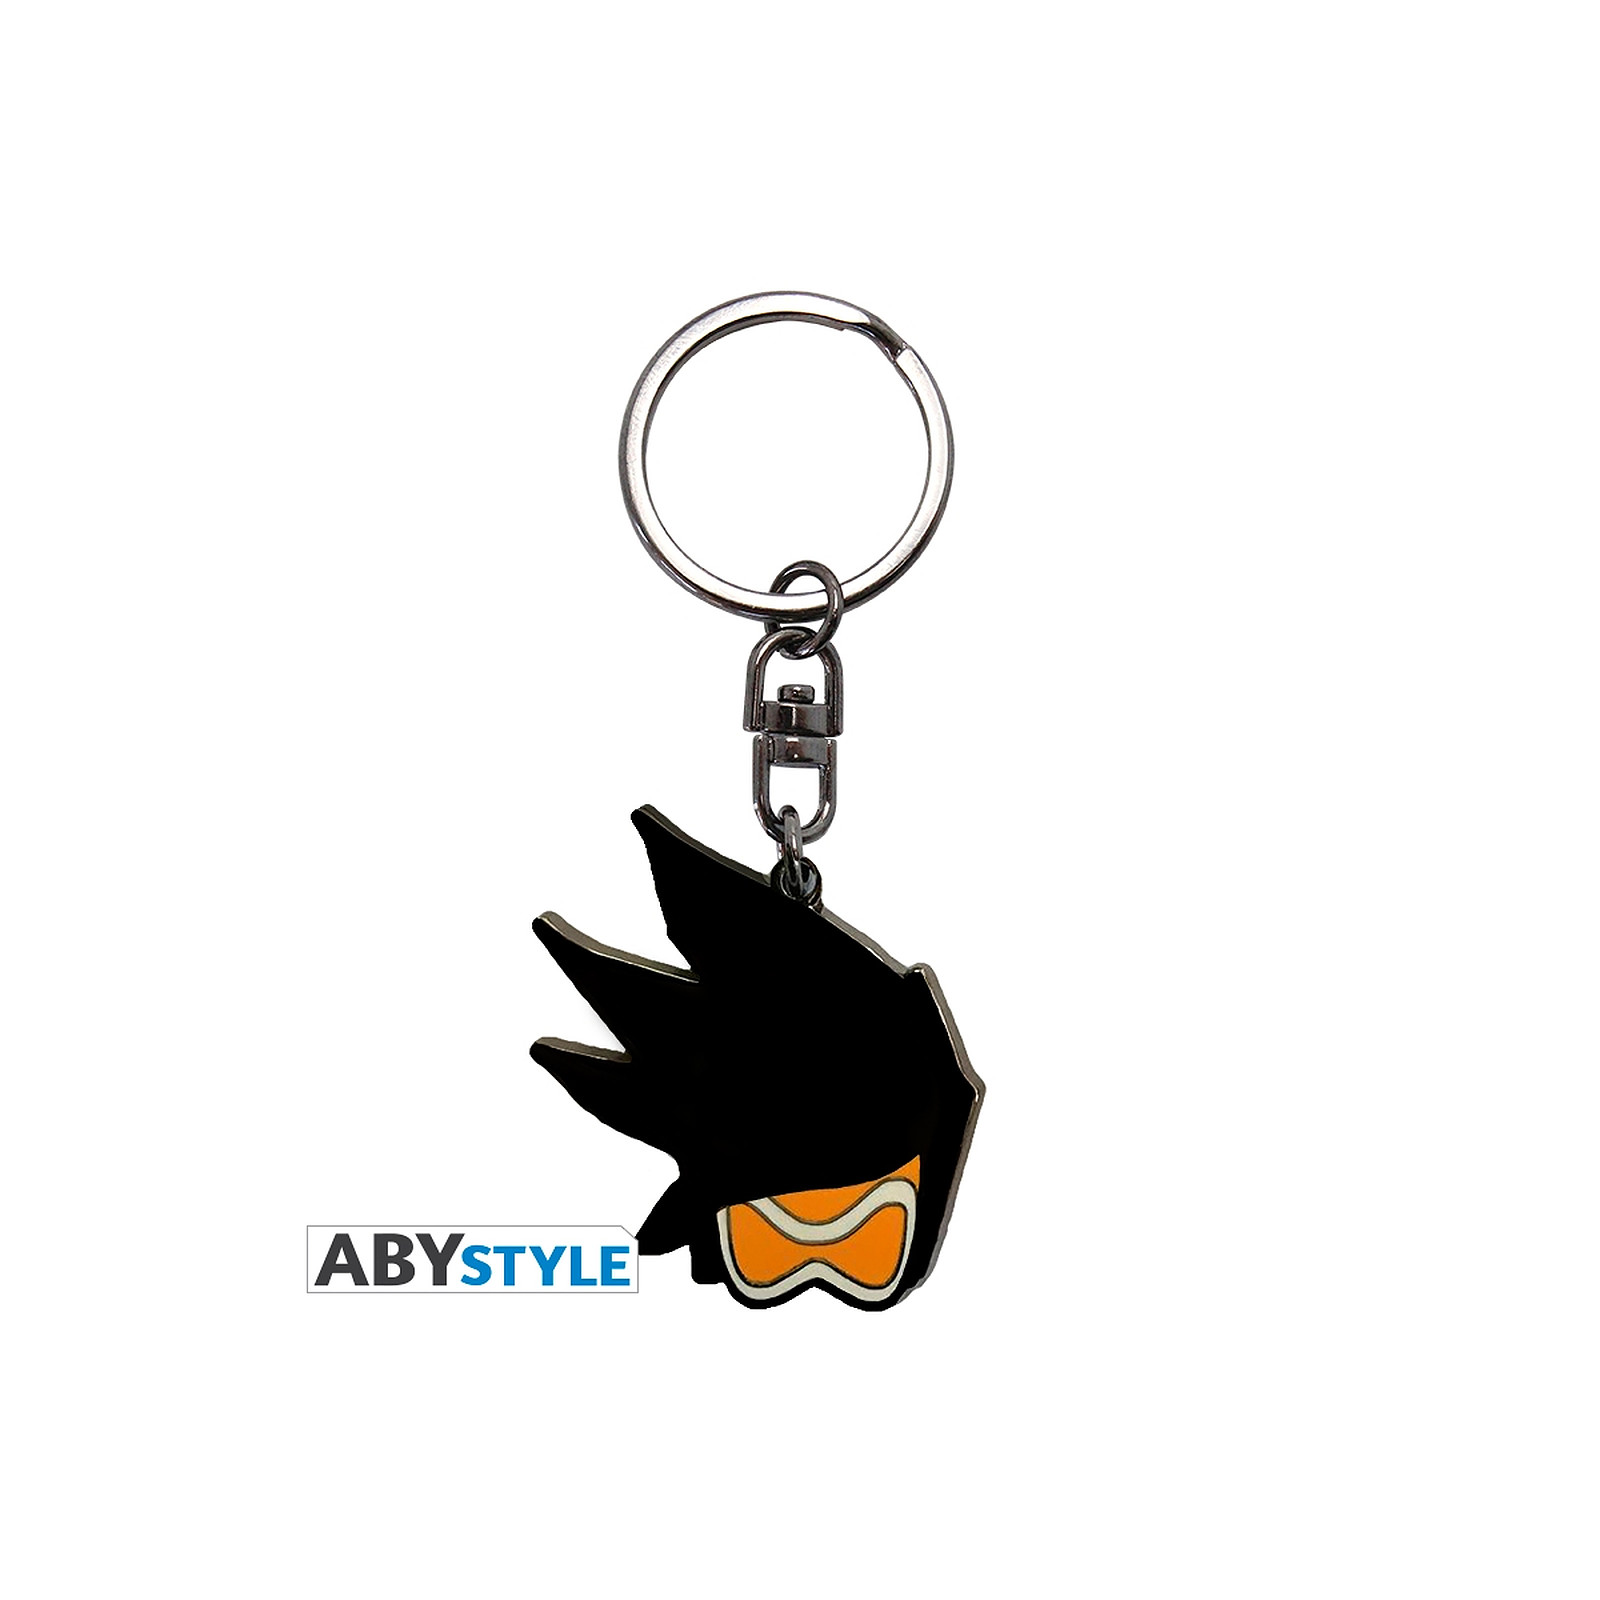 Overwatch - Porte-cles Tracer - Porte-cles Abystyle